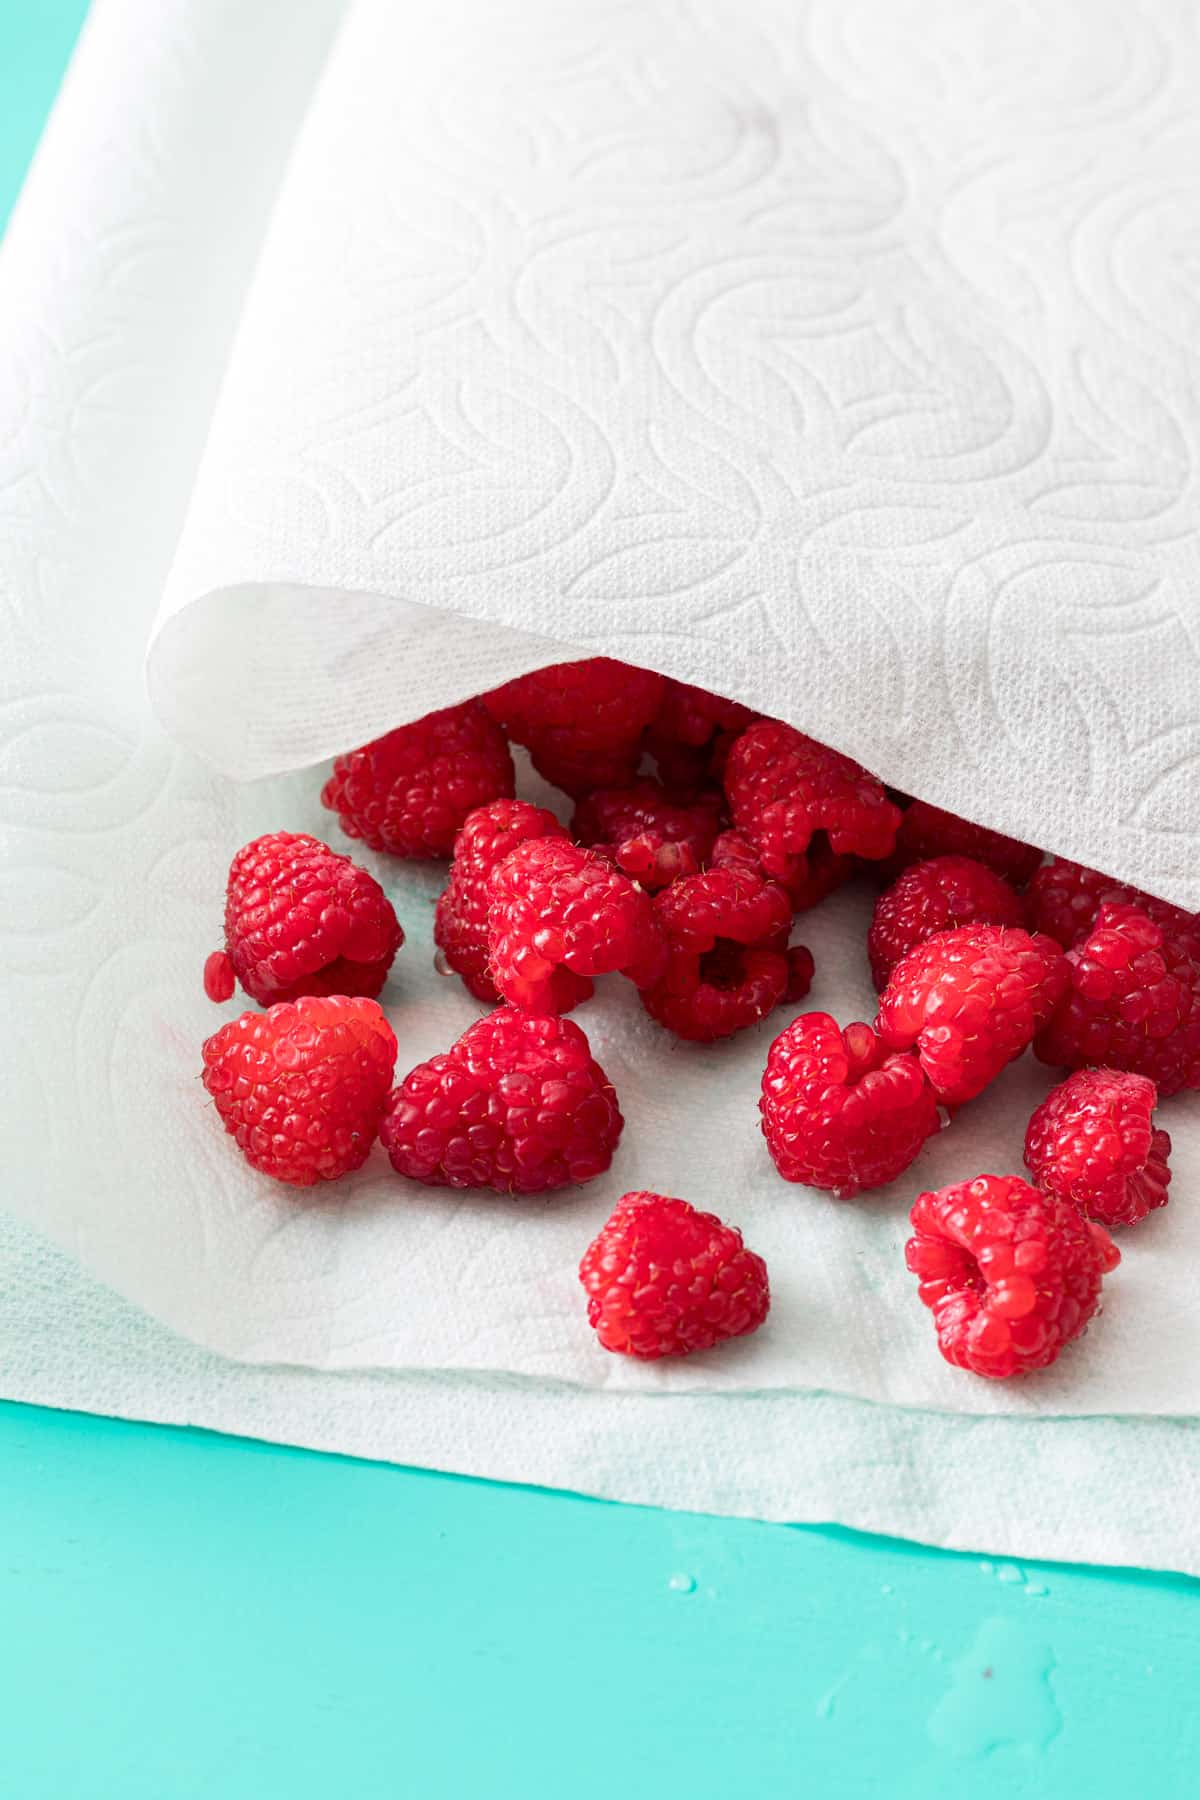 Drying berries off with paper towel.